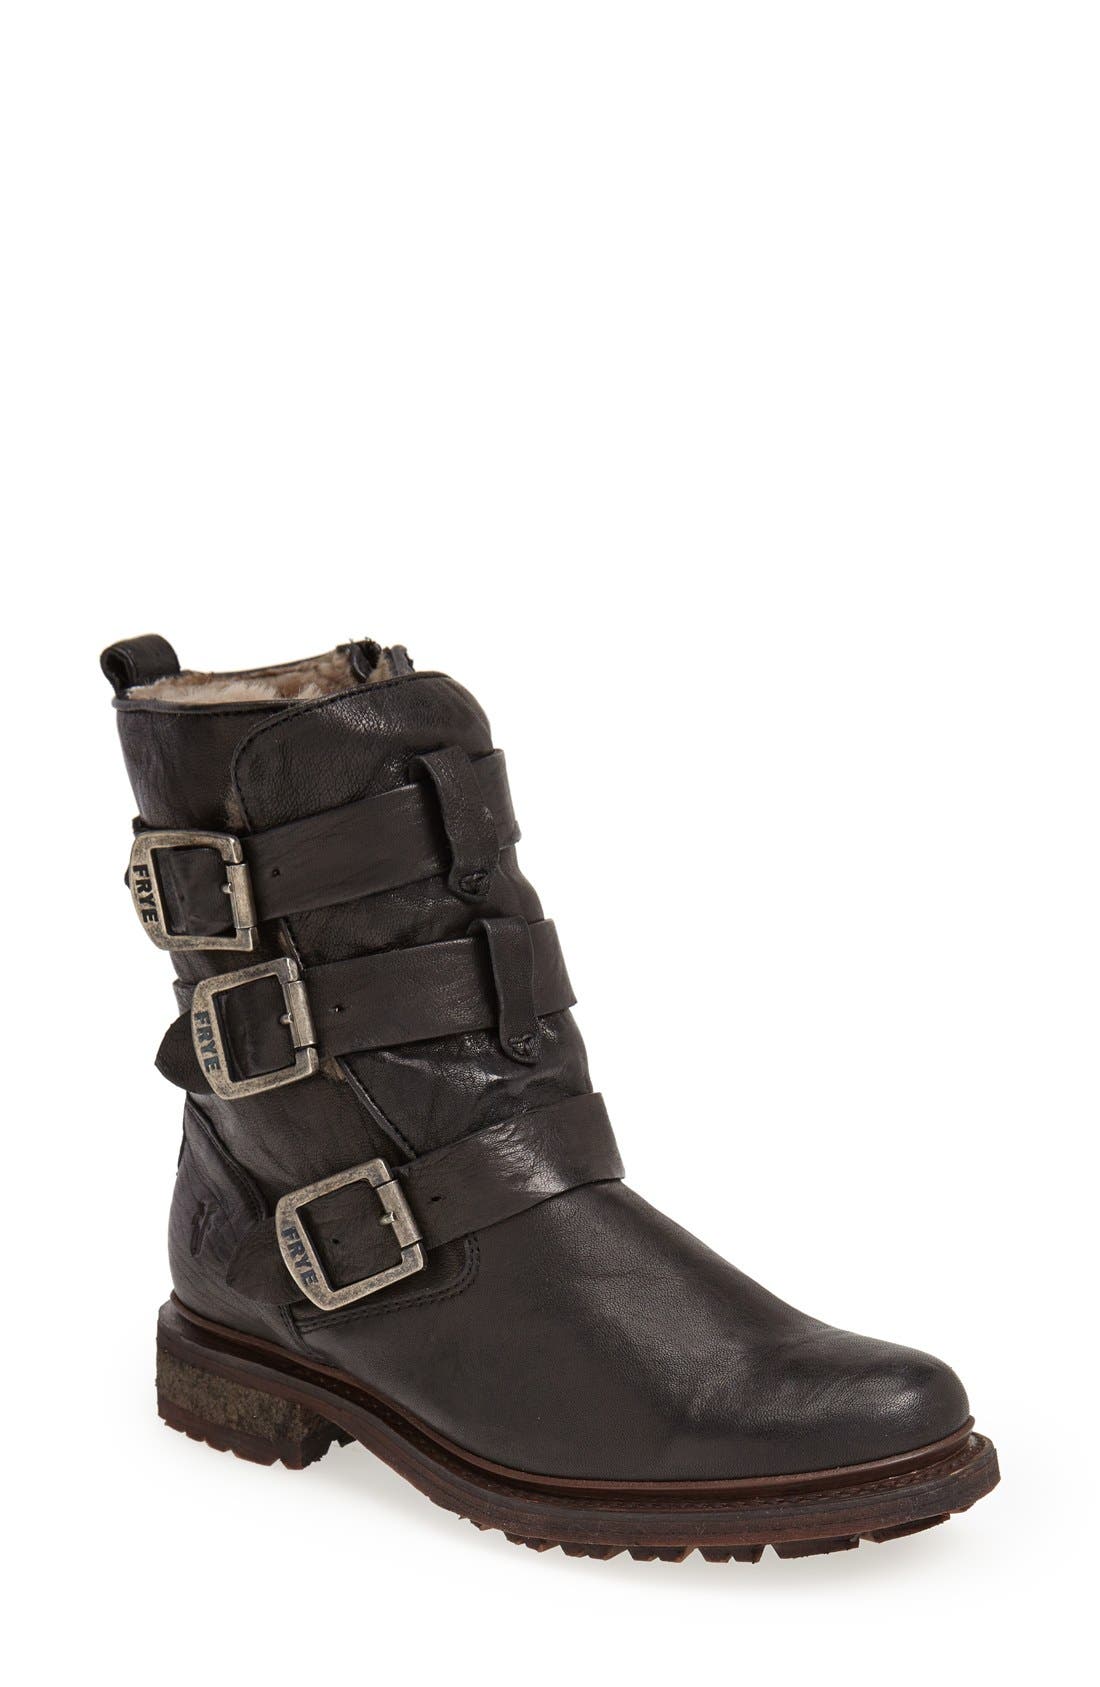 Frye 'Valerie' Shearling Lined Strappy 